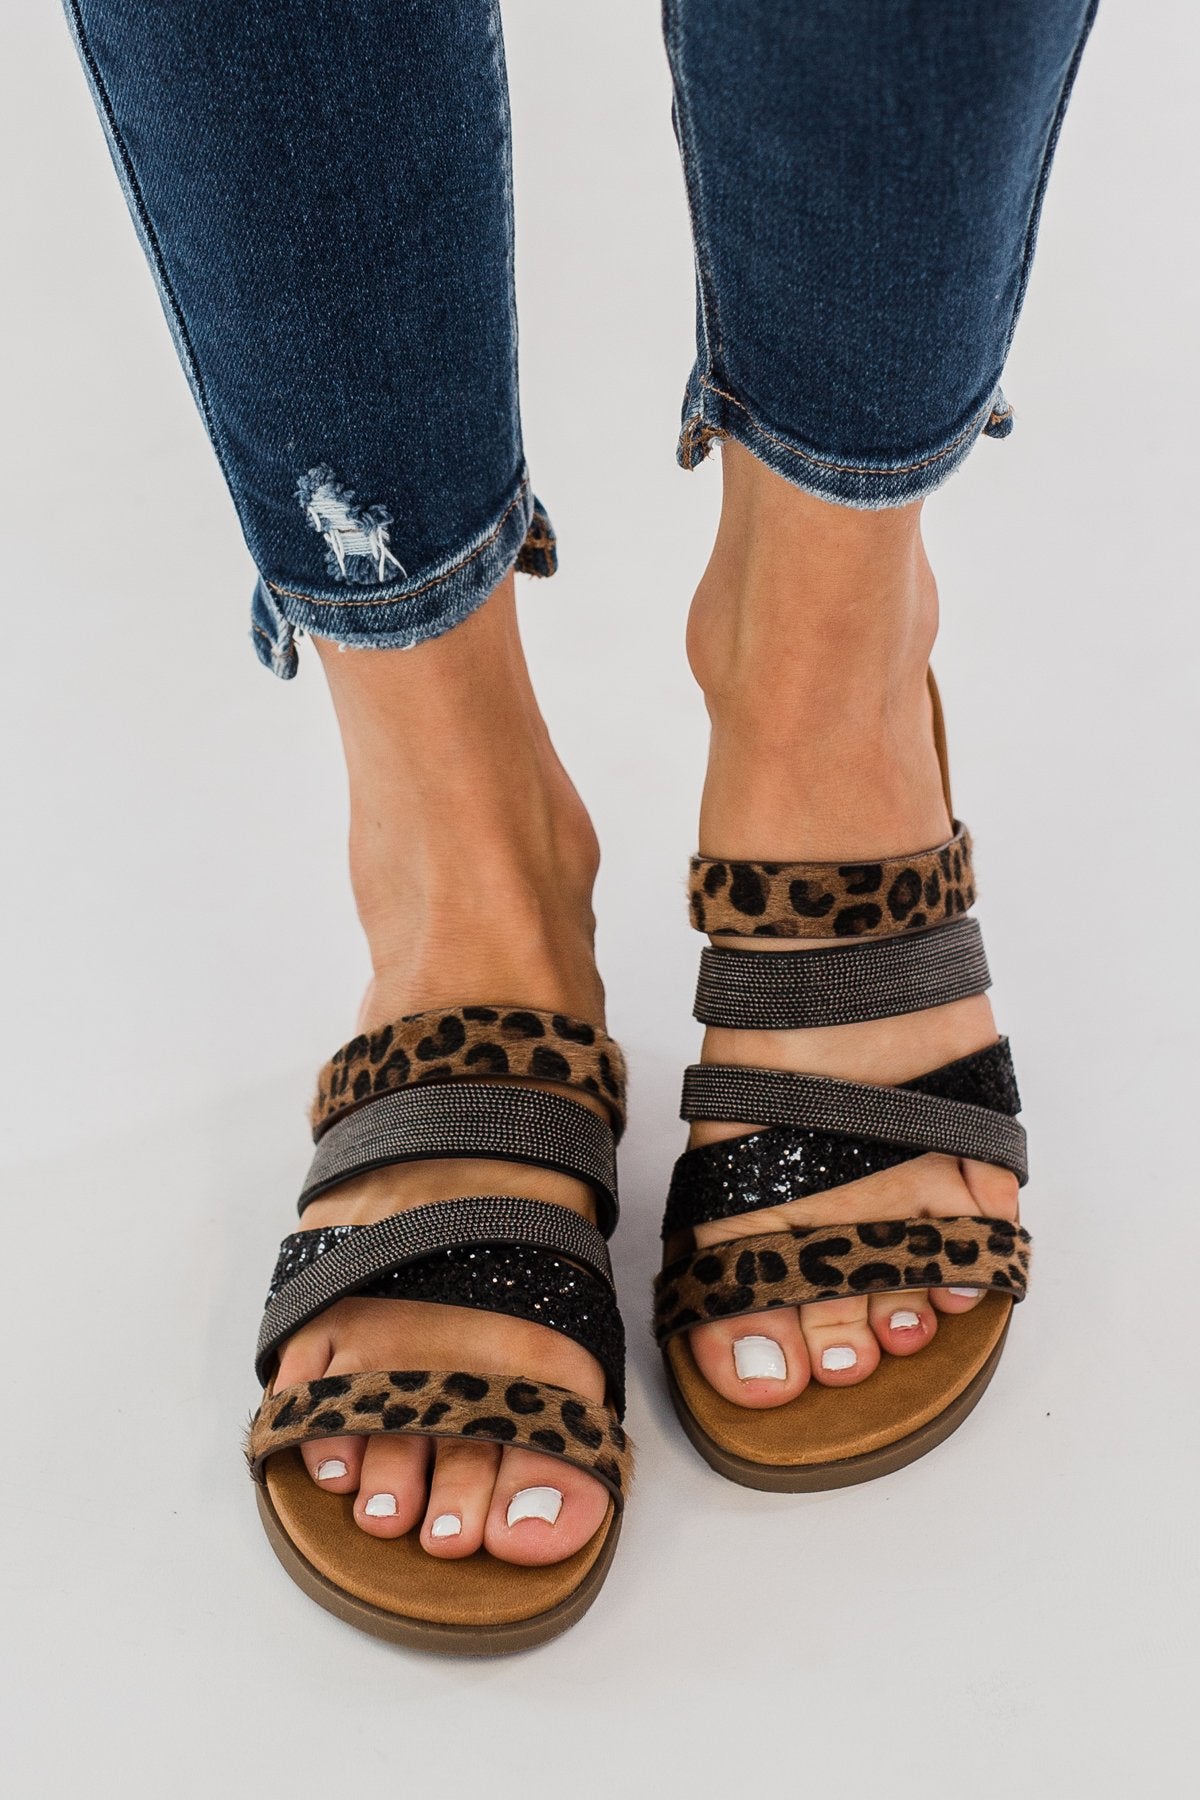 Very G Ginger 2 Sandals- Tan Leopard